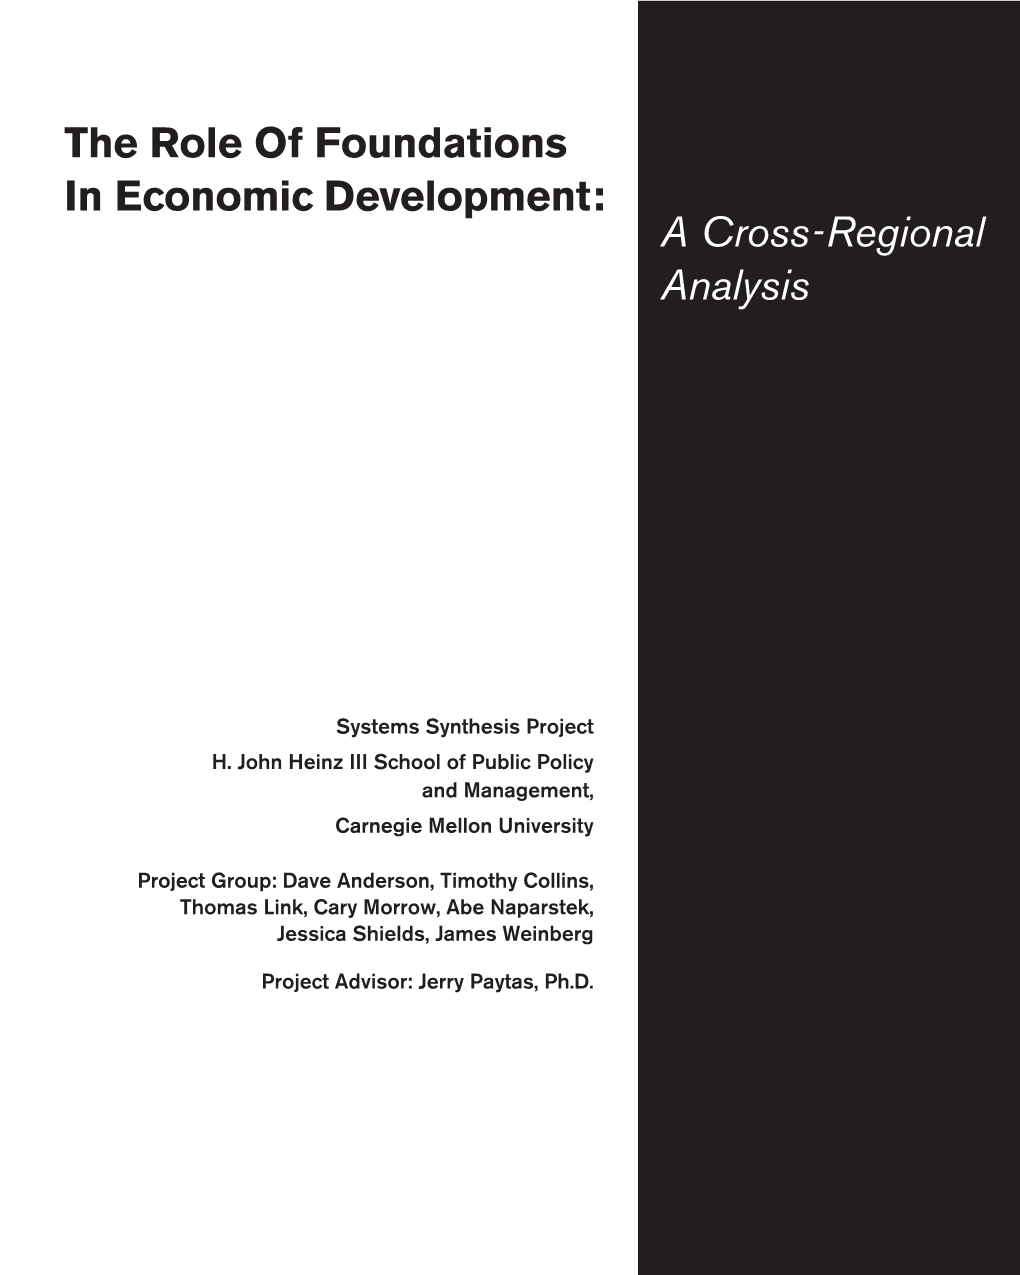 The Role of Foundations in Economic Development: a Cross-Regional Analysis